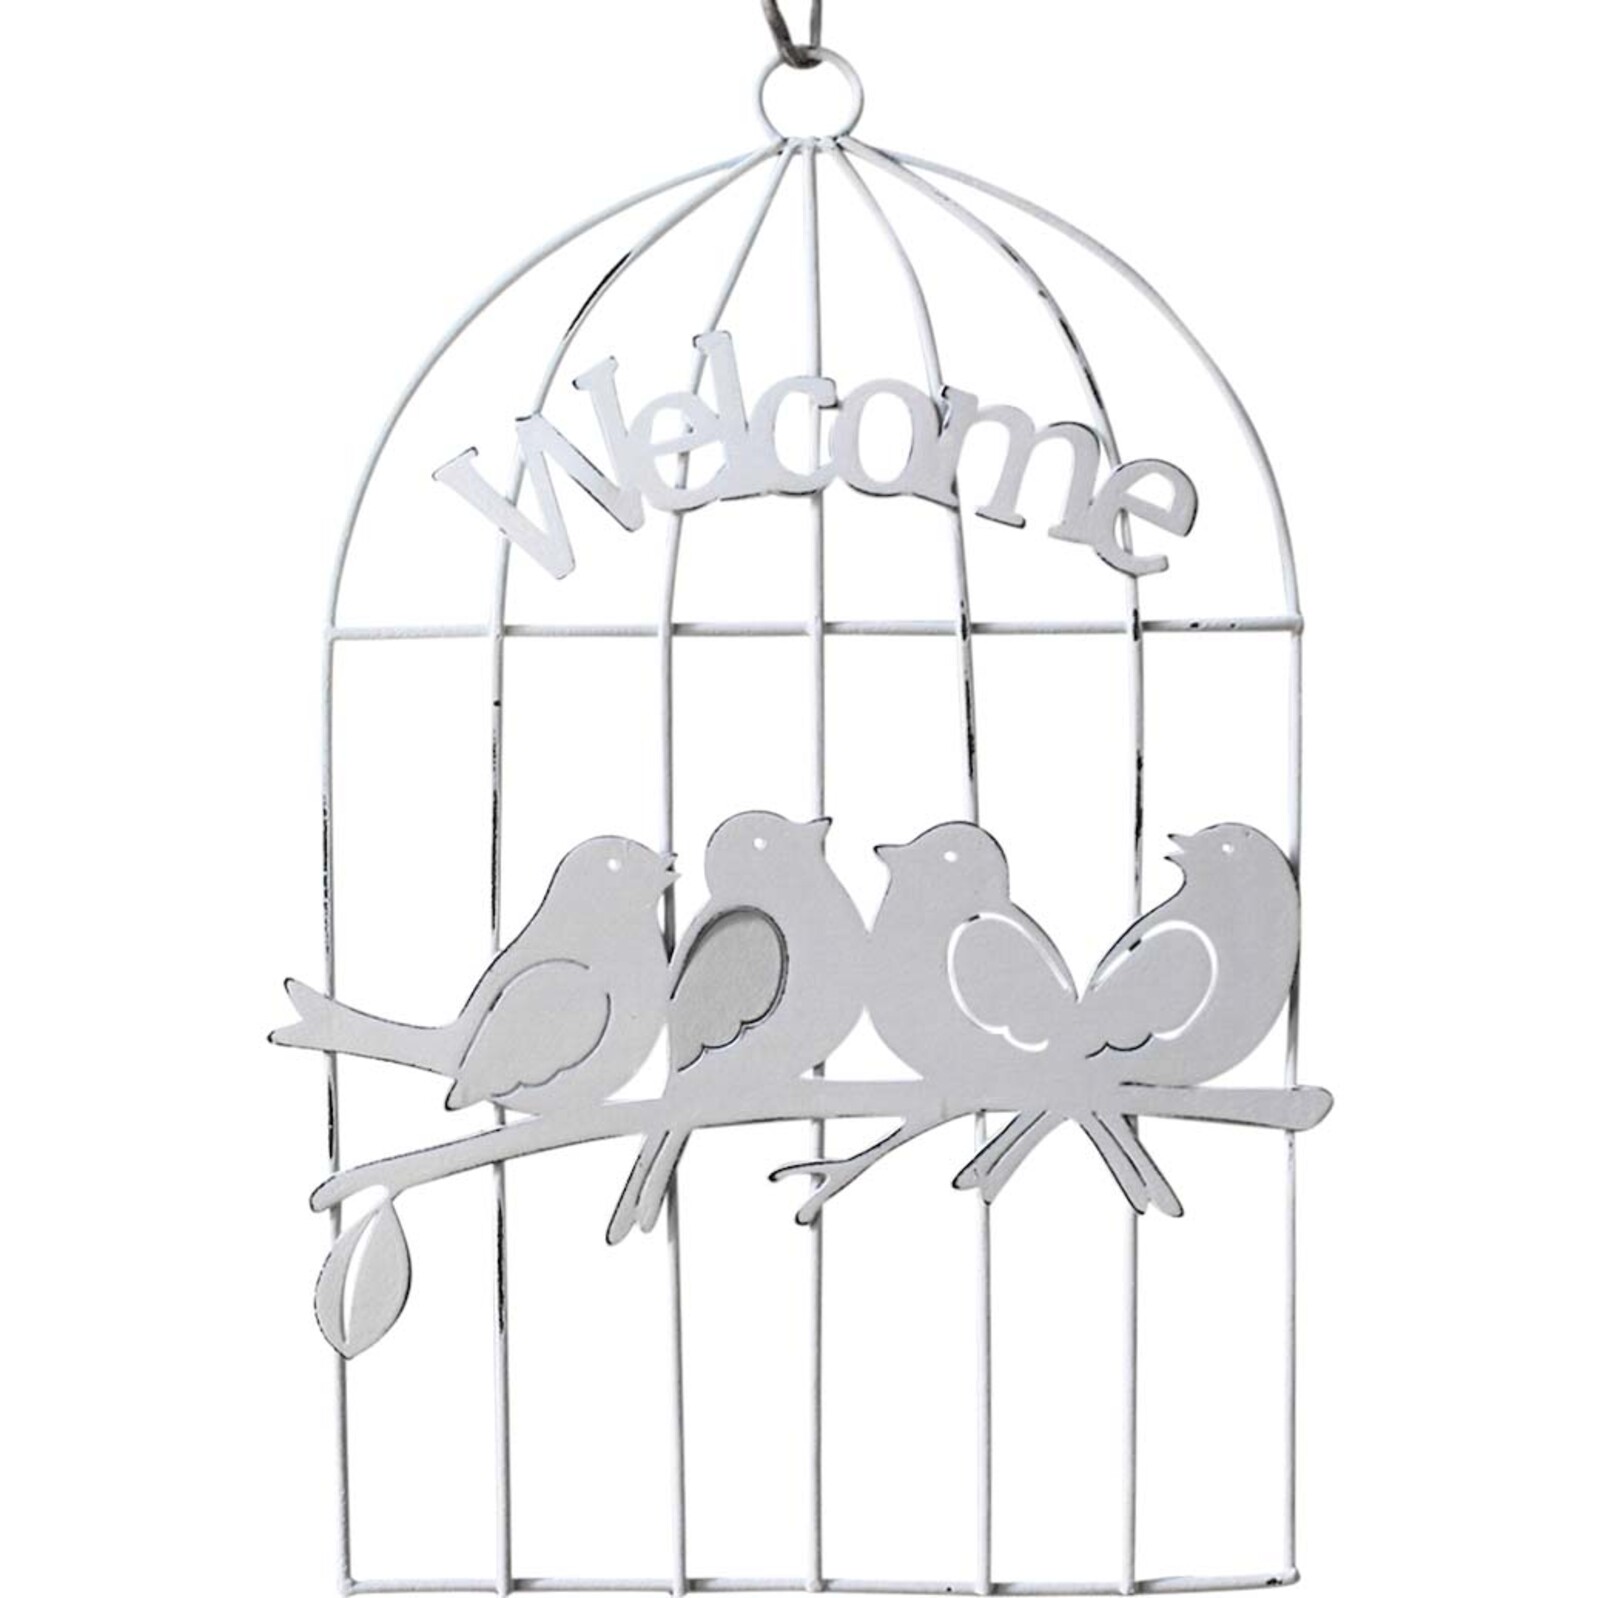 Hanging Birds in Cage White